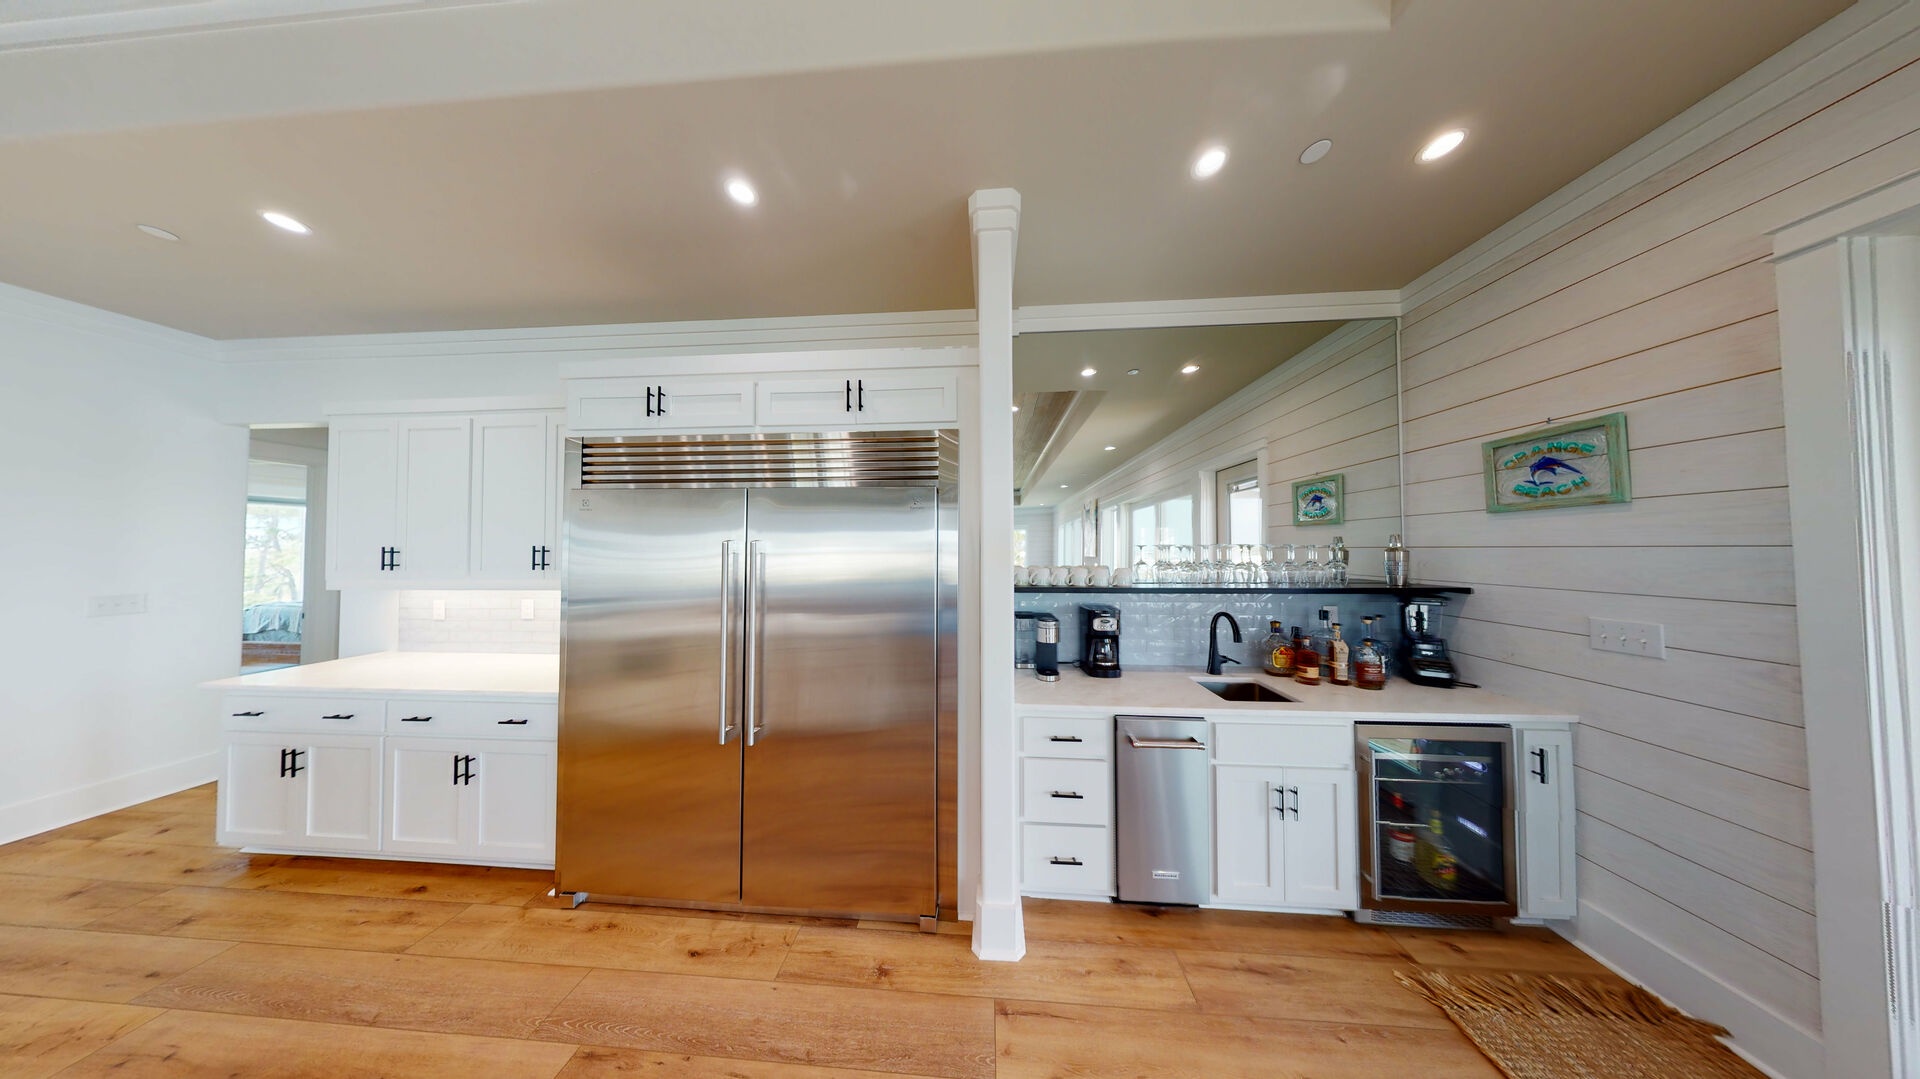 The kitchen has a large commercial refrigerator, wet/coffee bar, dedicated ice maker and a wine fridge